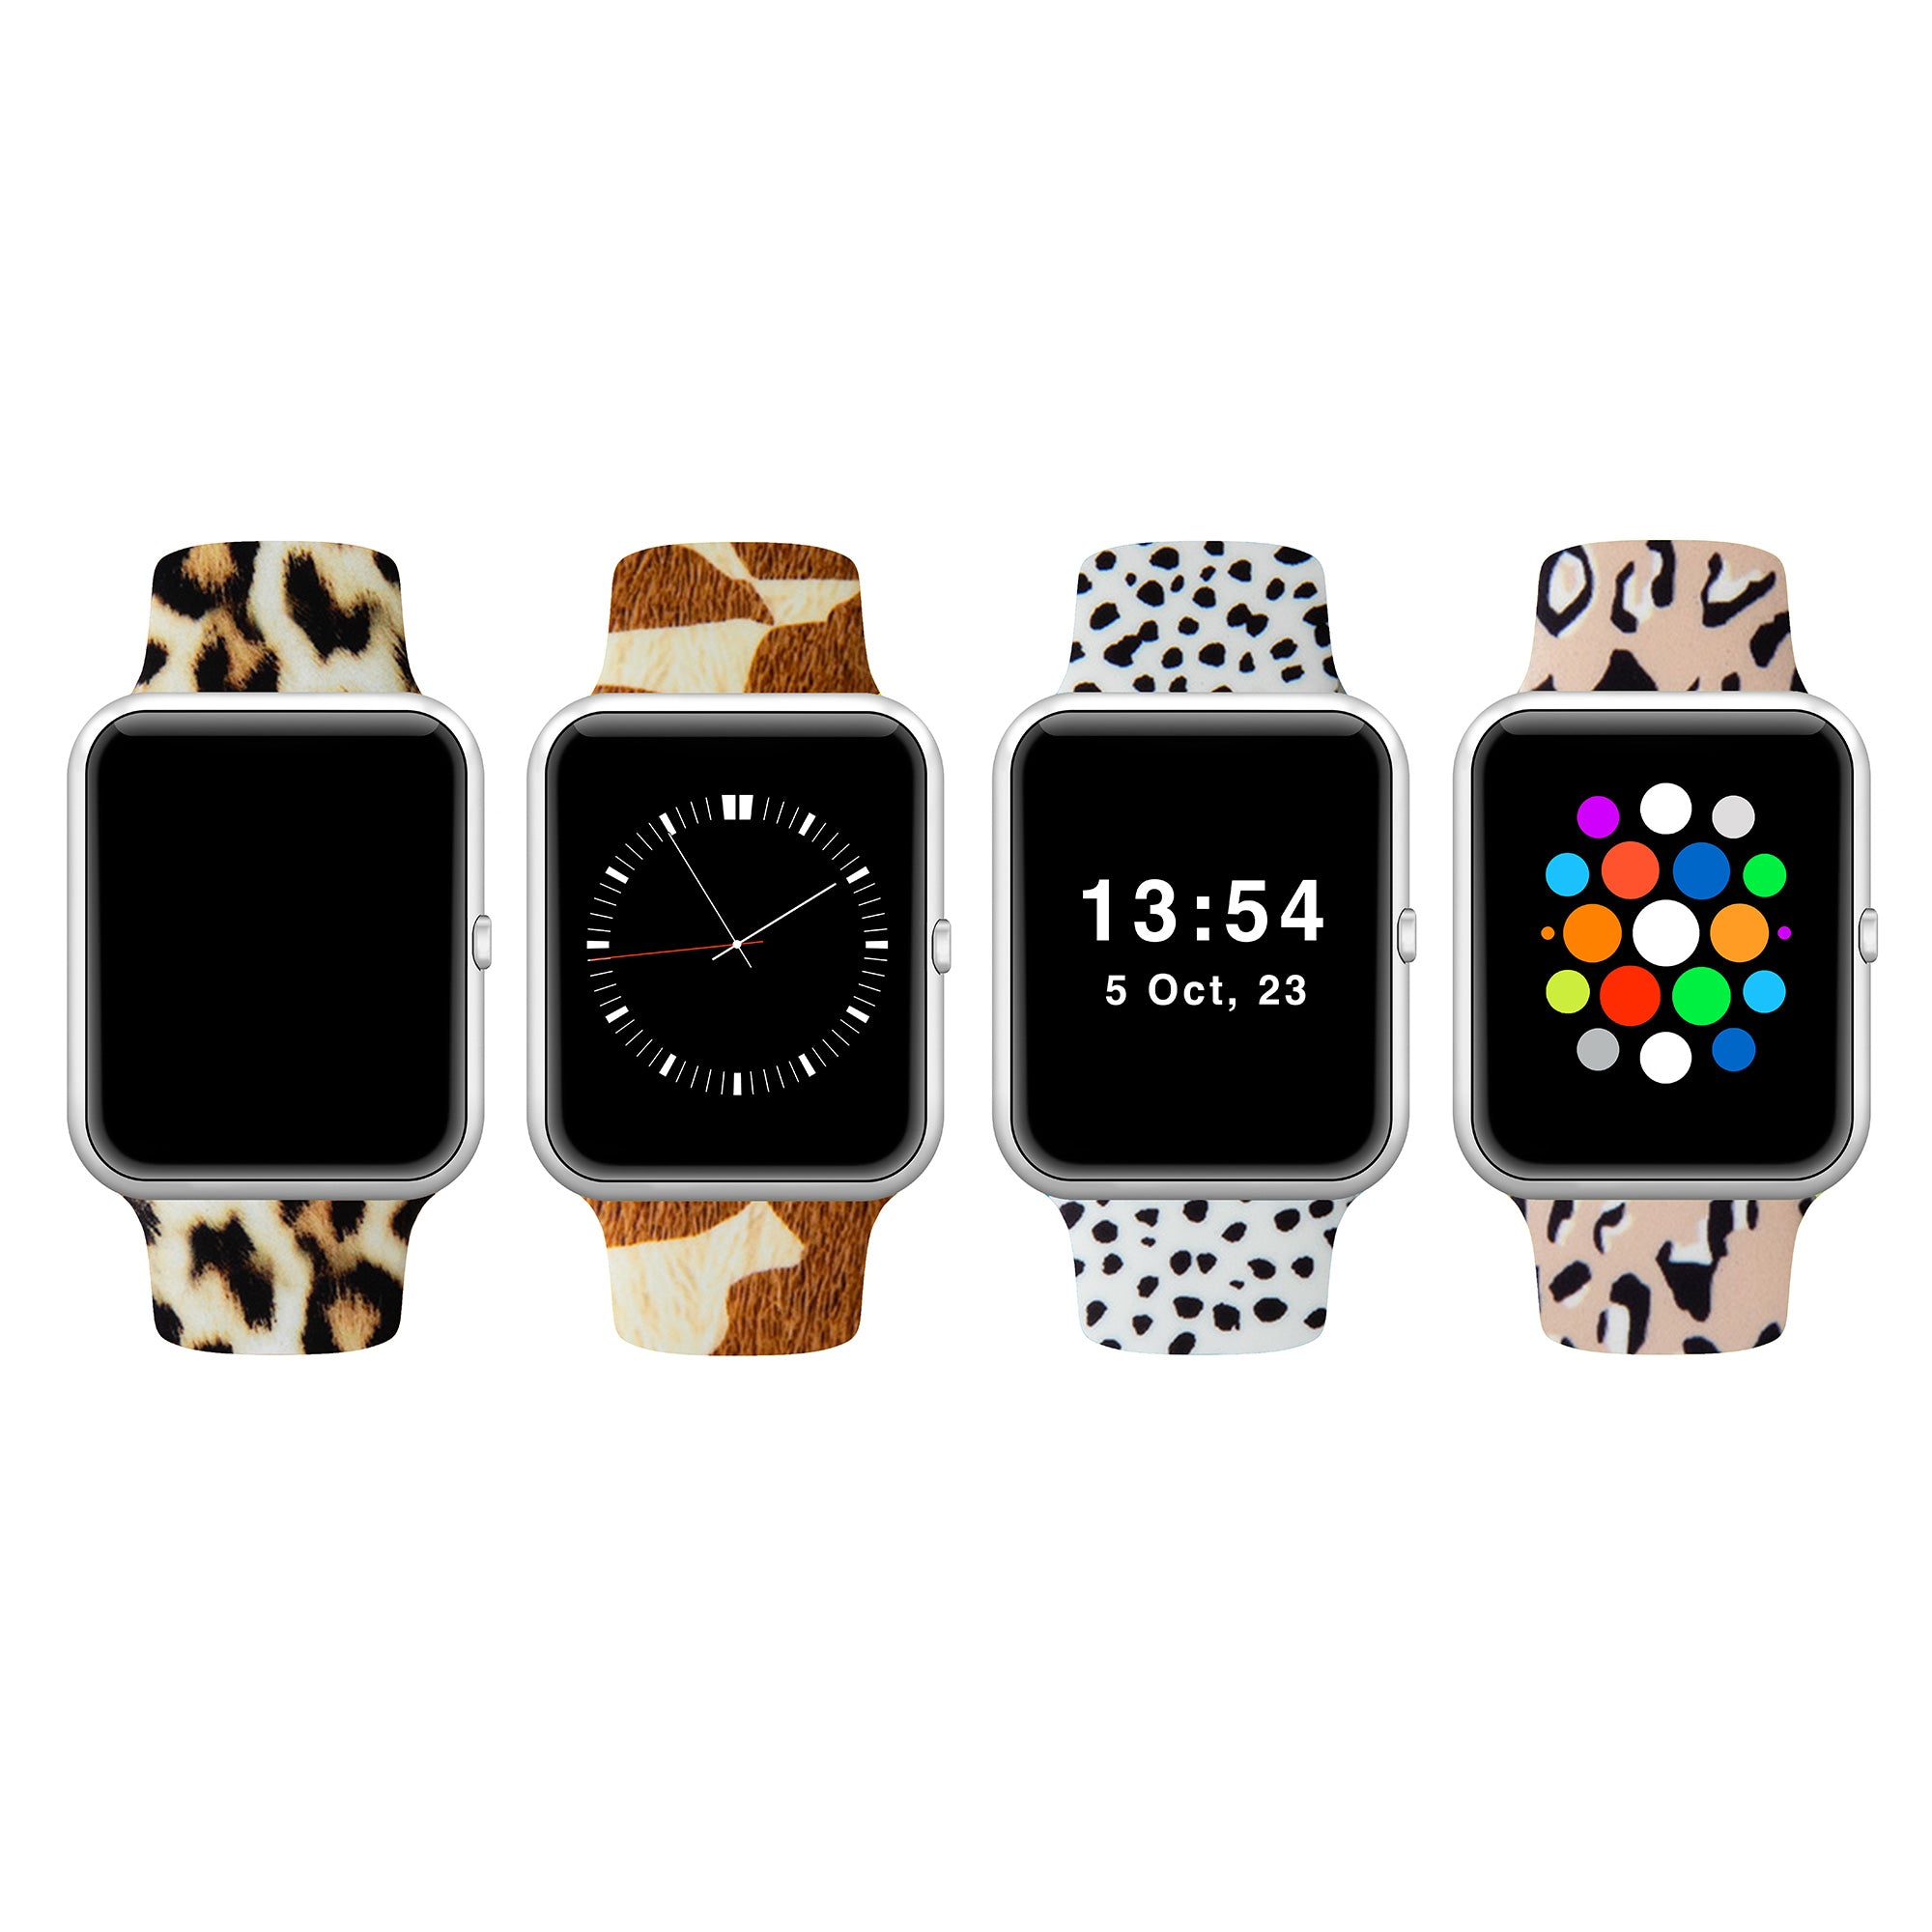 Patterned Silicone Apple Watch Band 38mm/40mm 42mm/44mm - Rainbow Paws - 42mm/44mm